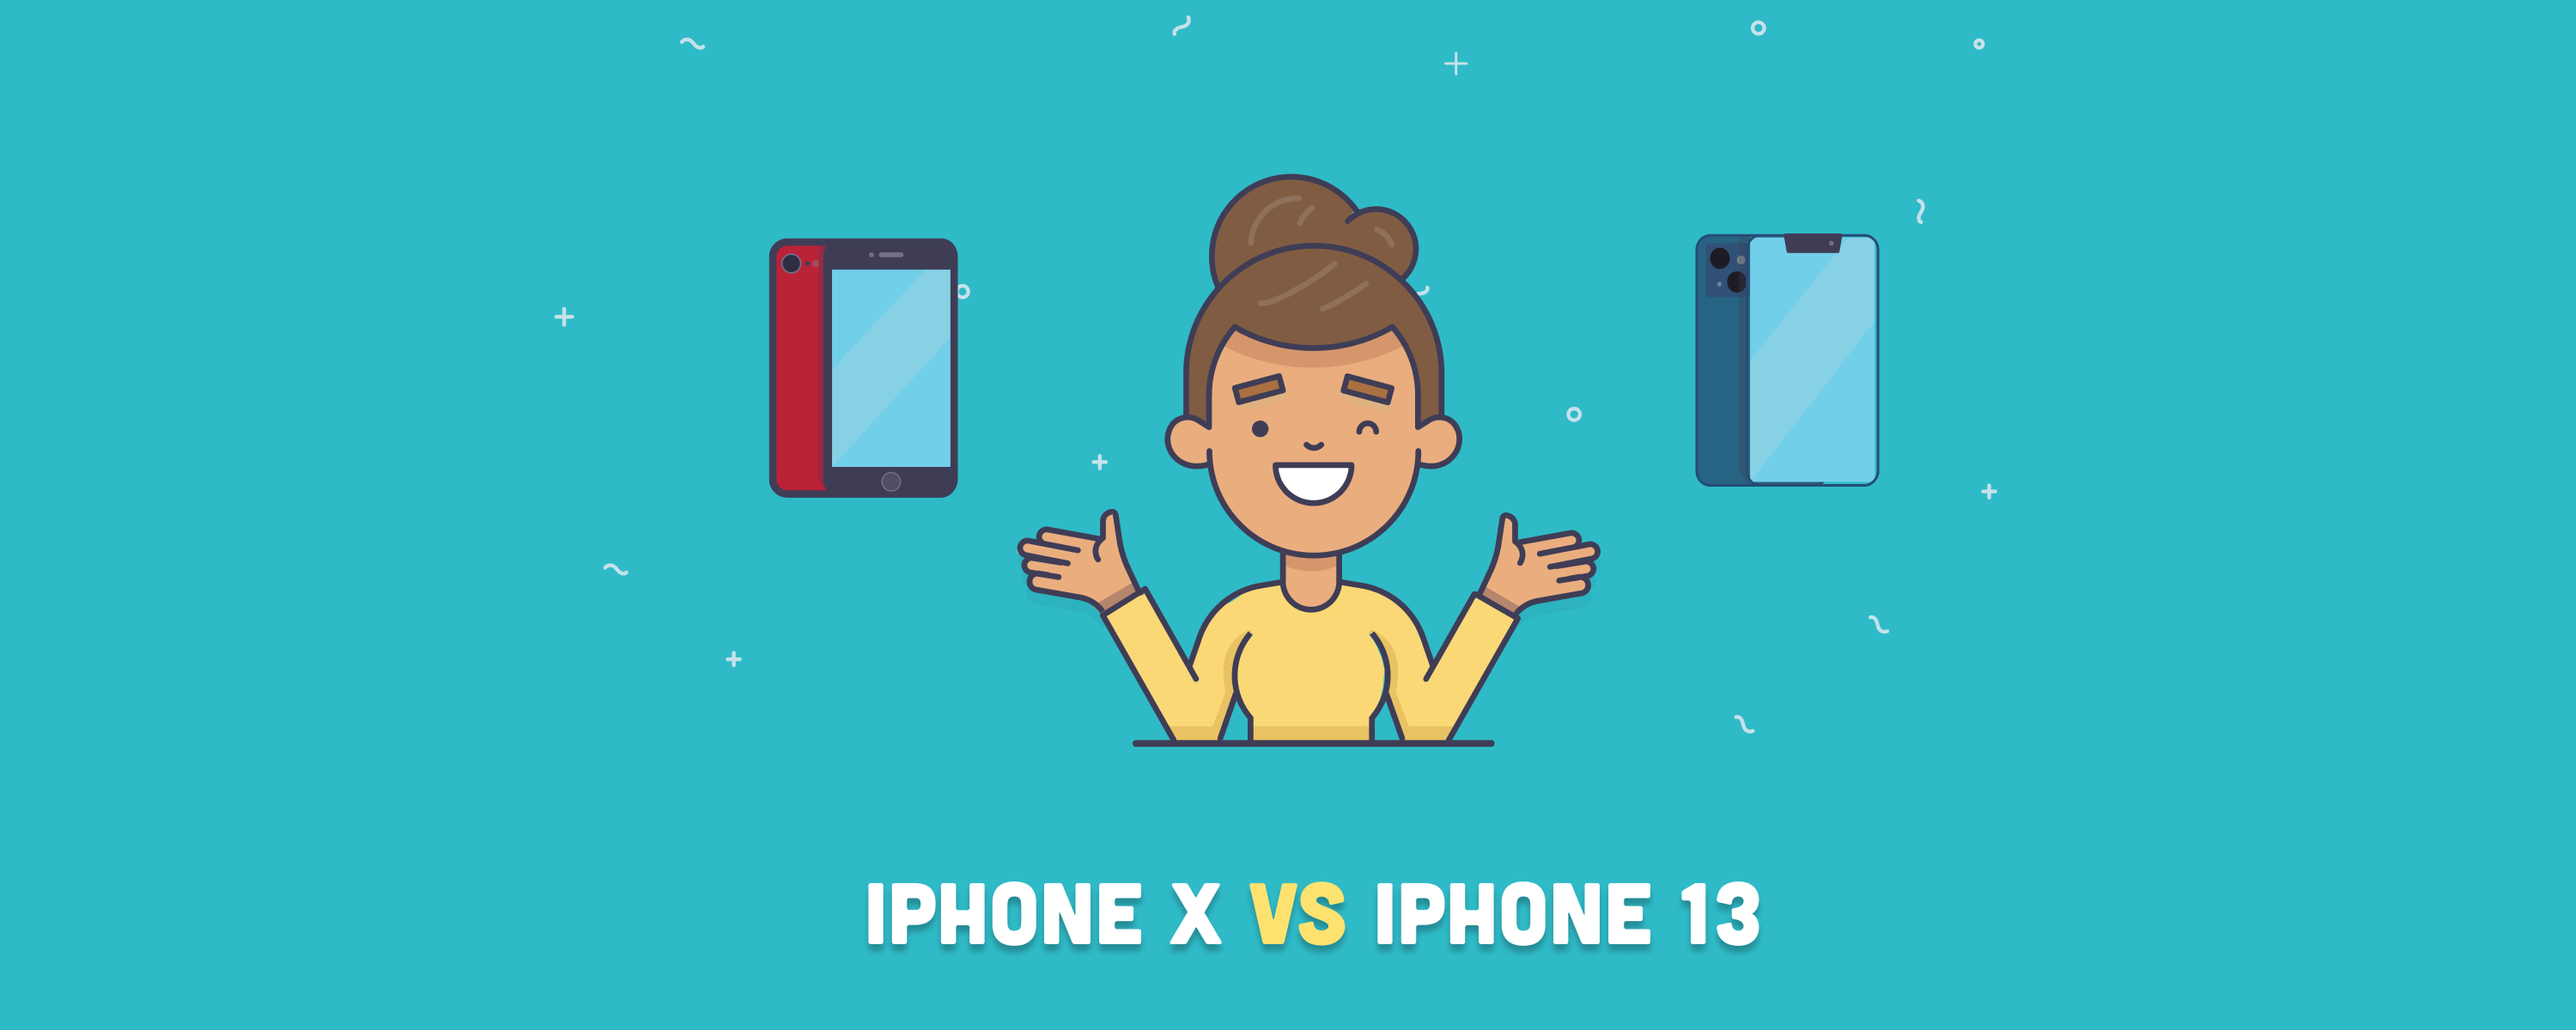 iPhone X vs. iPhone 13: What Are the Main Differences?